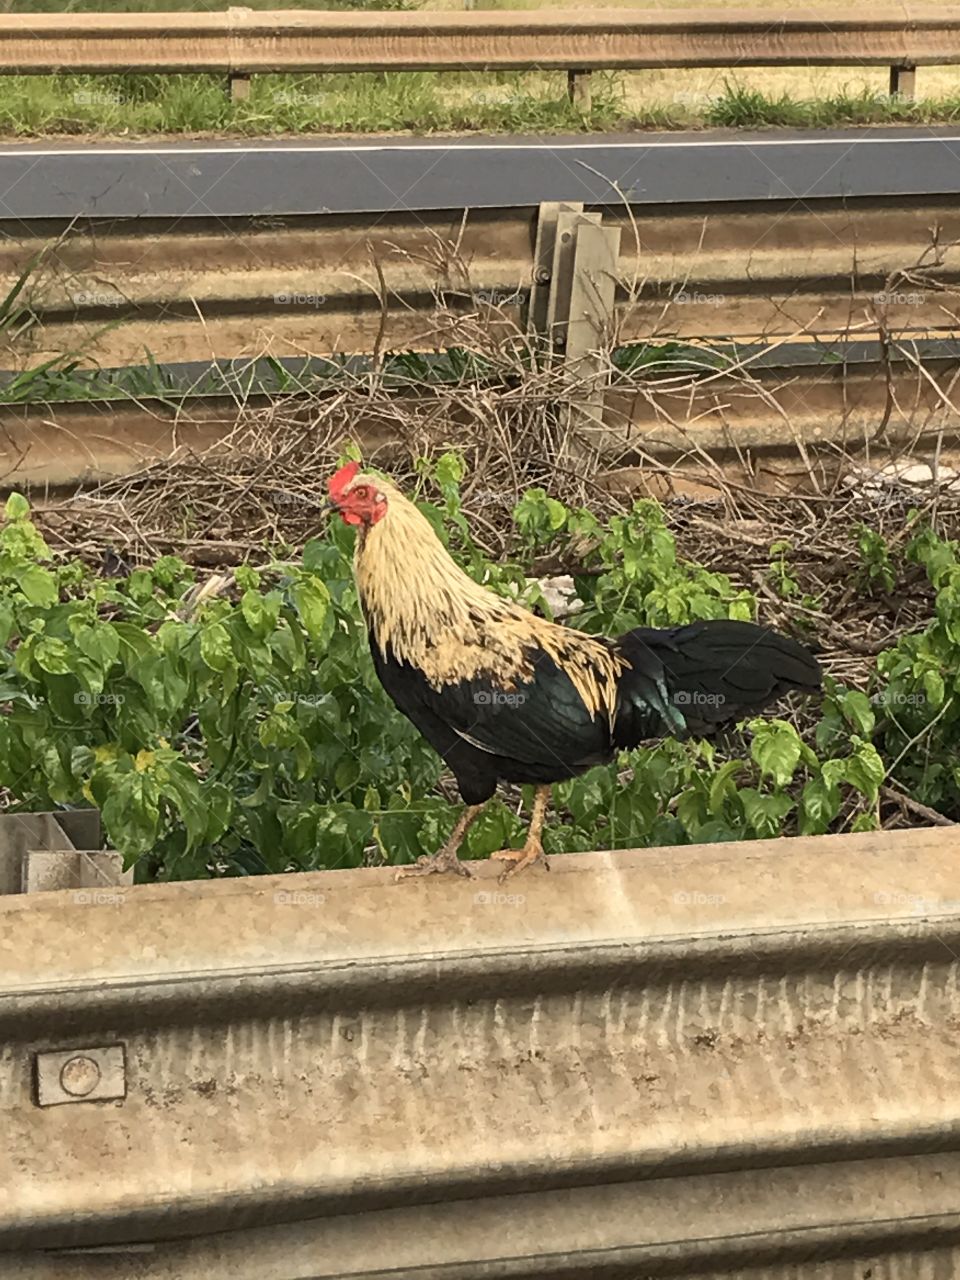 Just one of the local chickens in Maui. 